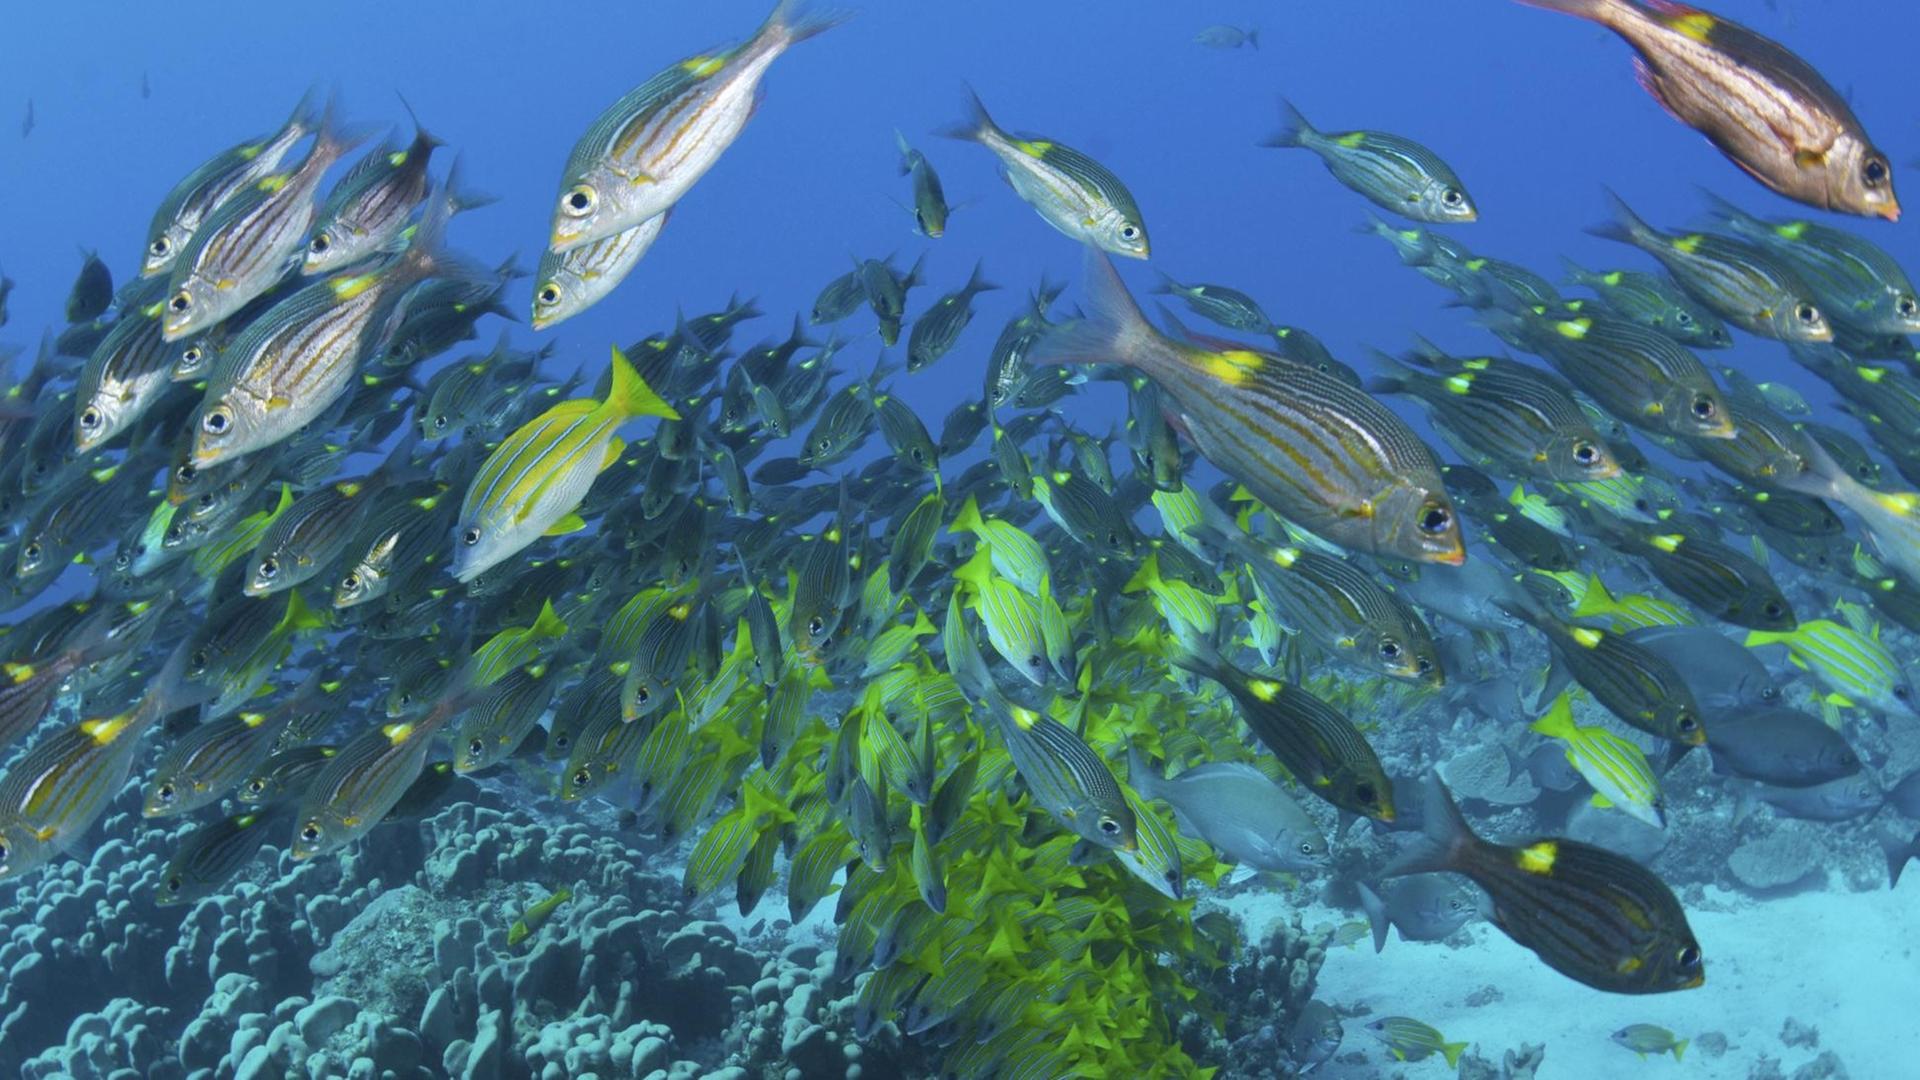 A picture taken on July 17, 2021 shows Common bluestripe snappers(yellow) and Striped large-eye breams, silver, swimming above pavona clavus colony off Hira-jima Island in Ogasawara Village, Tokyo. ( The Yomiuri Shimbun via AP Images )